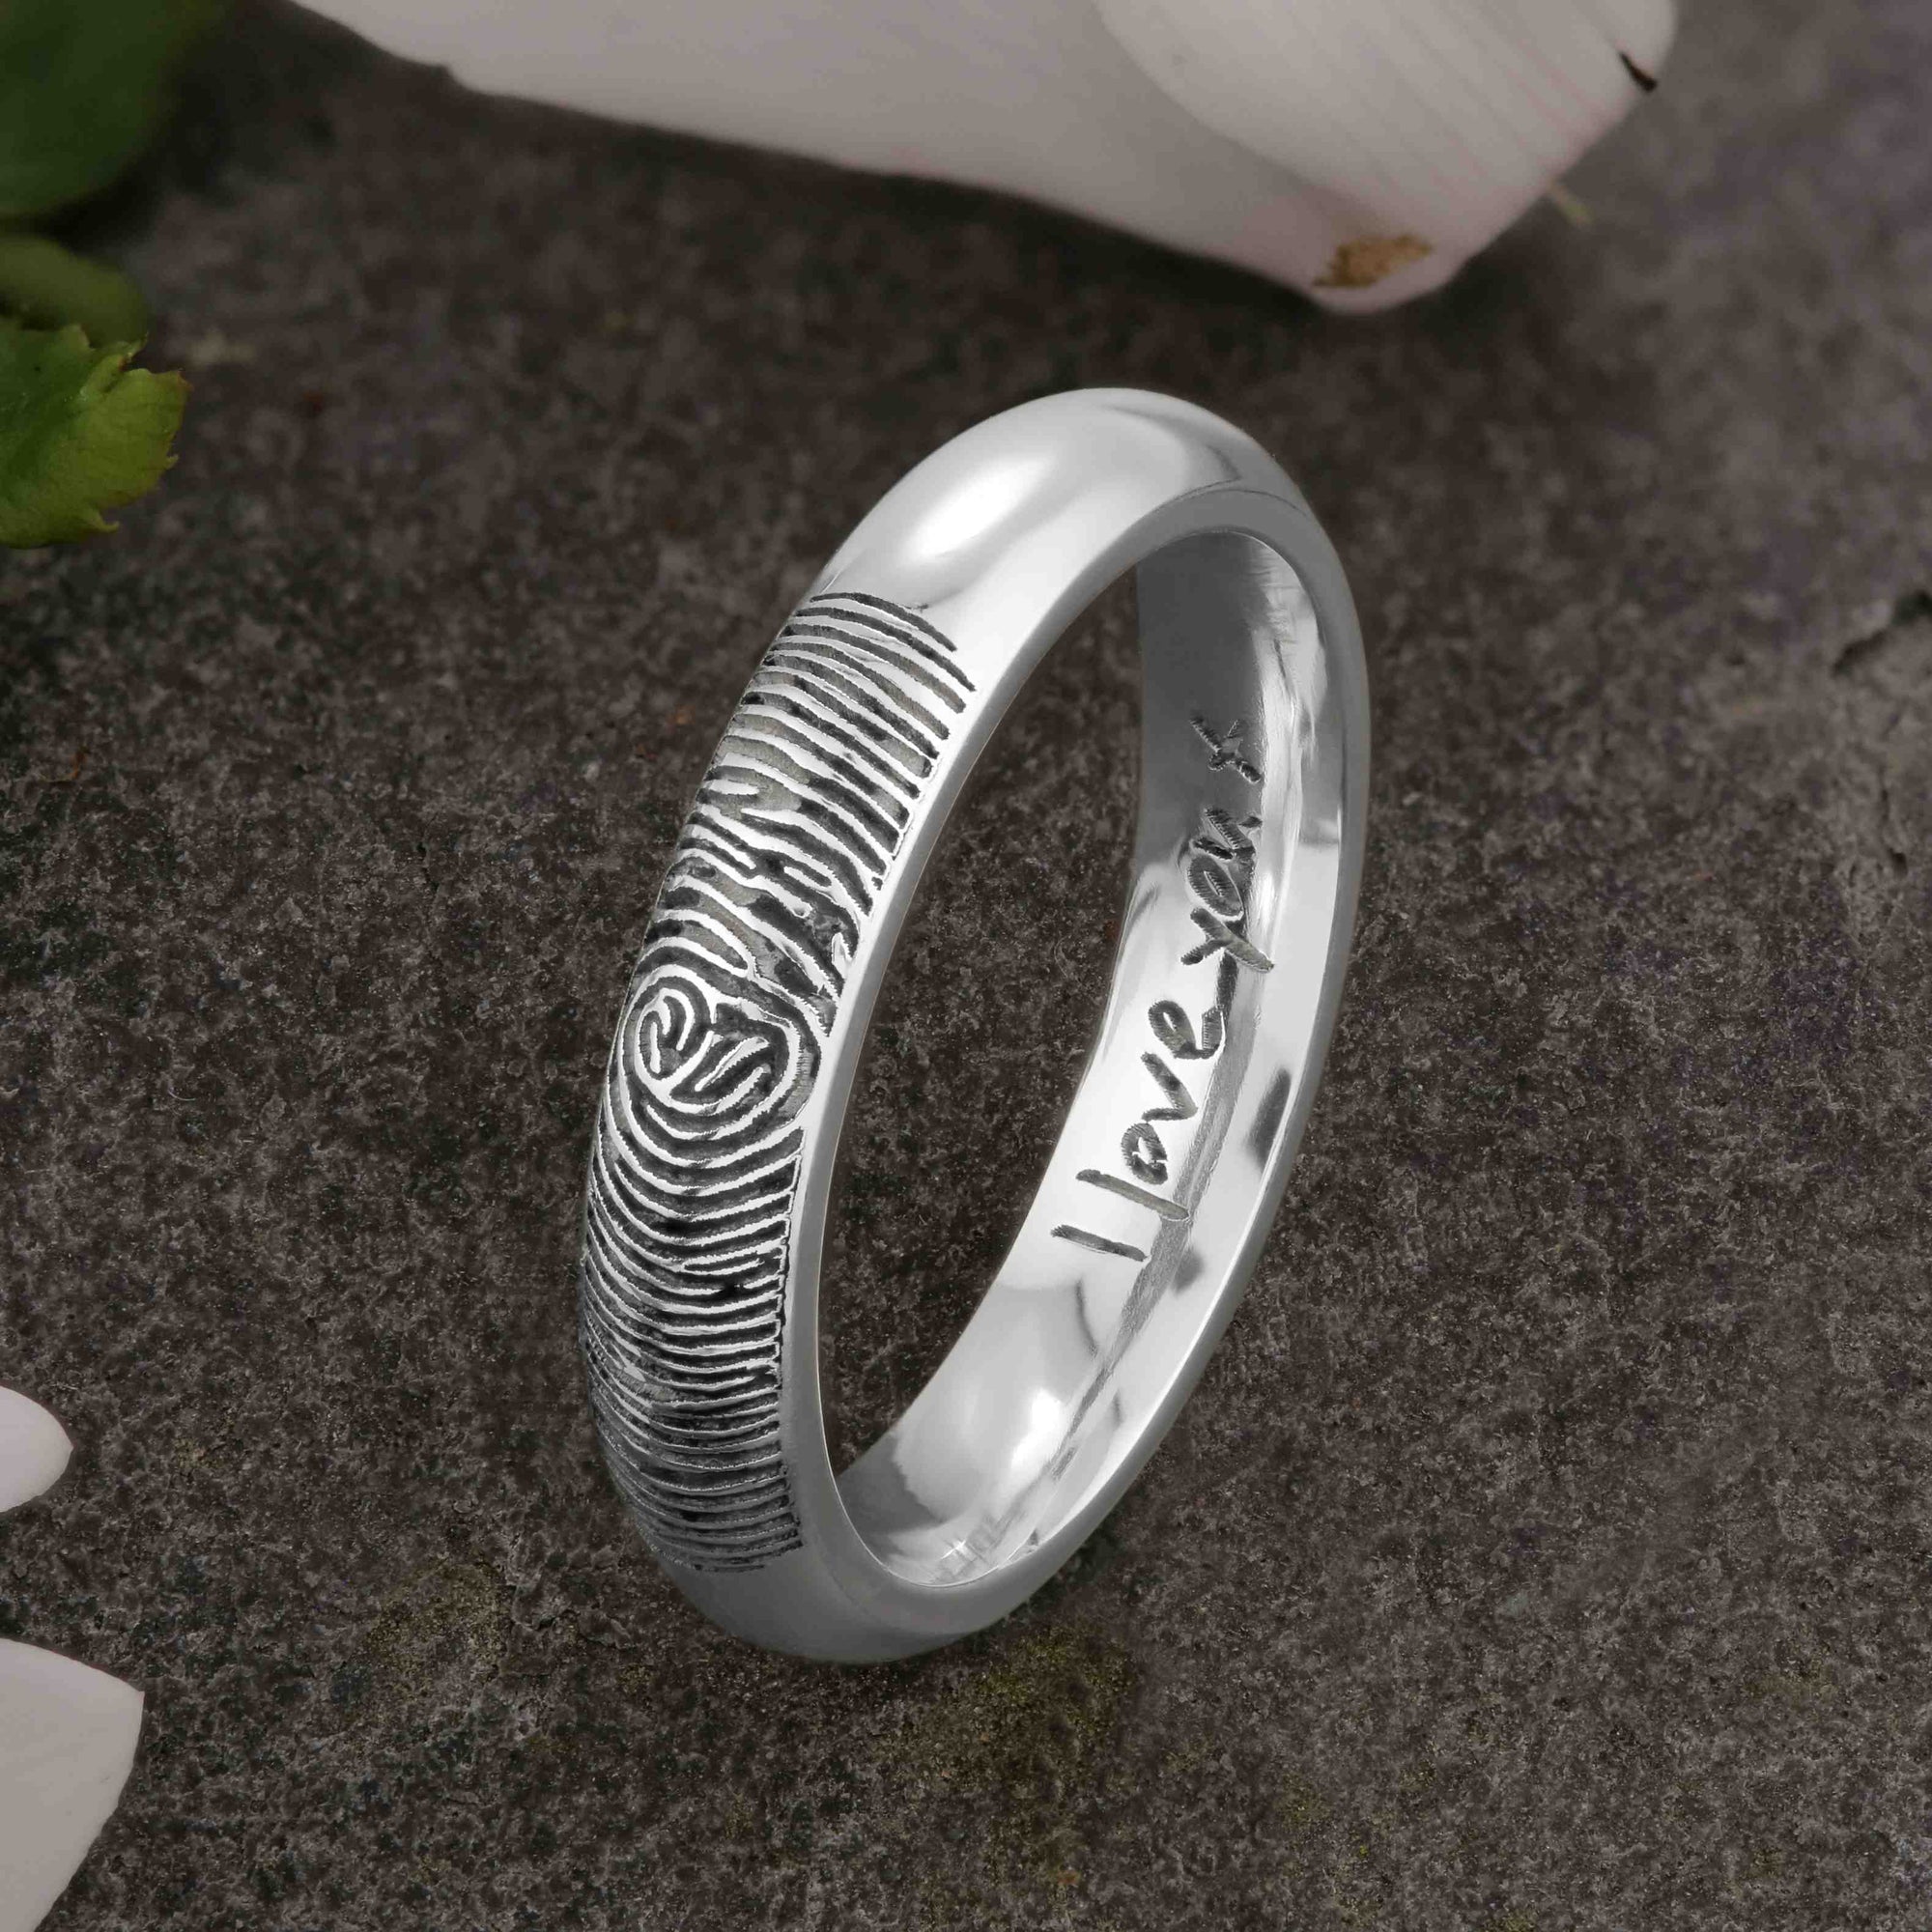 A unique platinum Wedding Ring with an engraved fingerprint on the outer surface | Engraved with a handwritten personal message on the inside of the ring | The engraving reads "I love you. x" | Contemporary dark laser engraving | Ladies slim 4mm wide, comfort court profile ring | Custom personalised wedding jewellery | Sophia Alexander Fingerprint Jewellery | Handmade in Suffolk UK